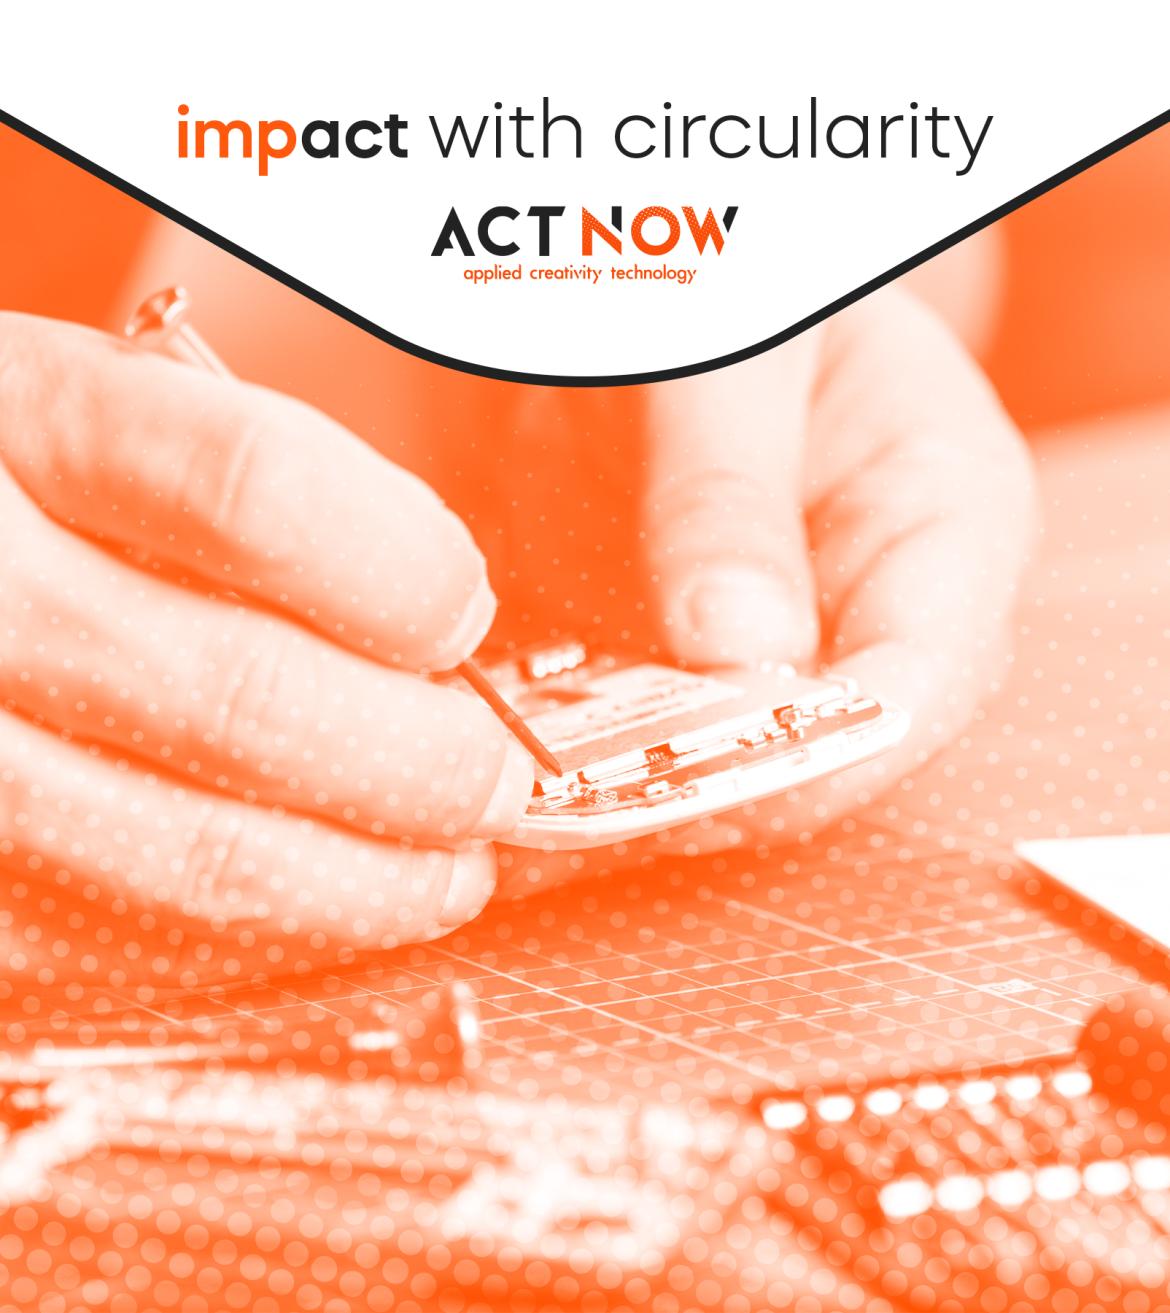 Impact with circularity